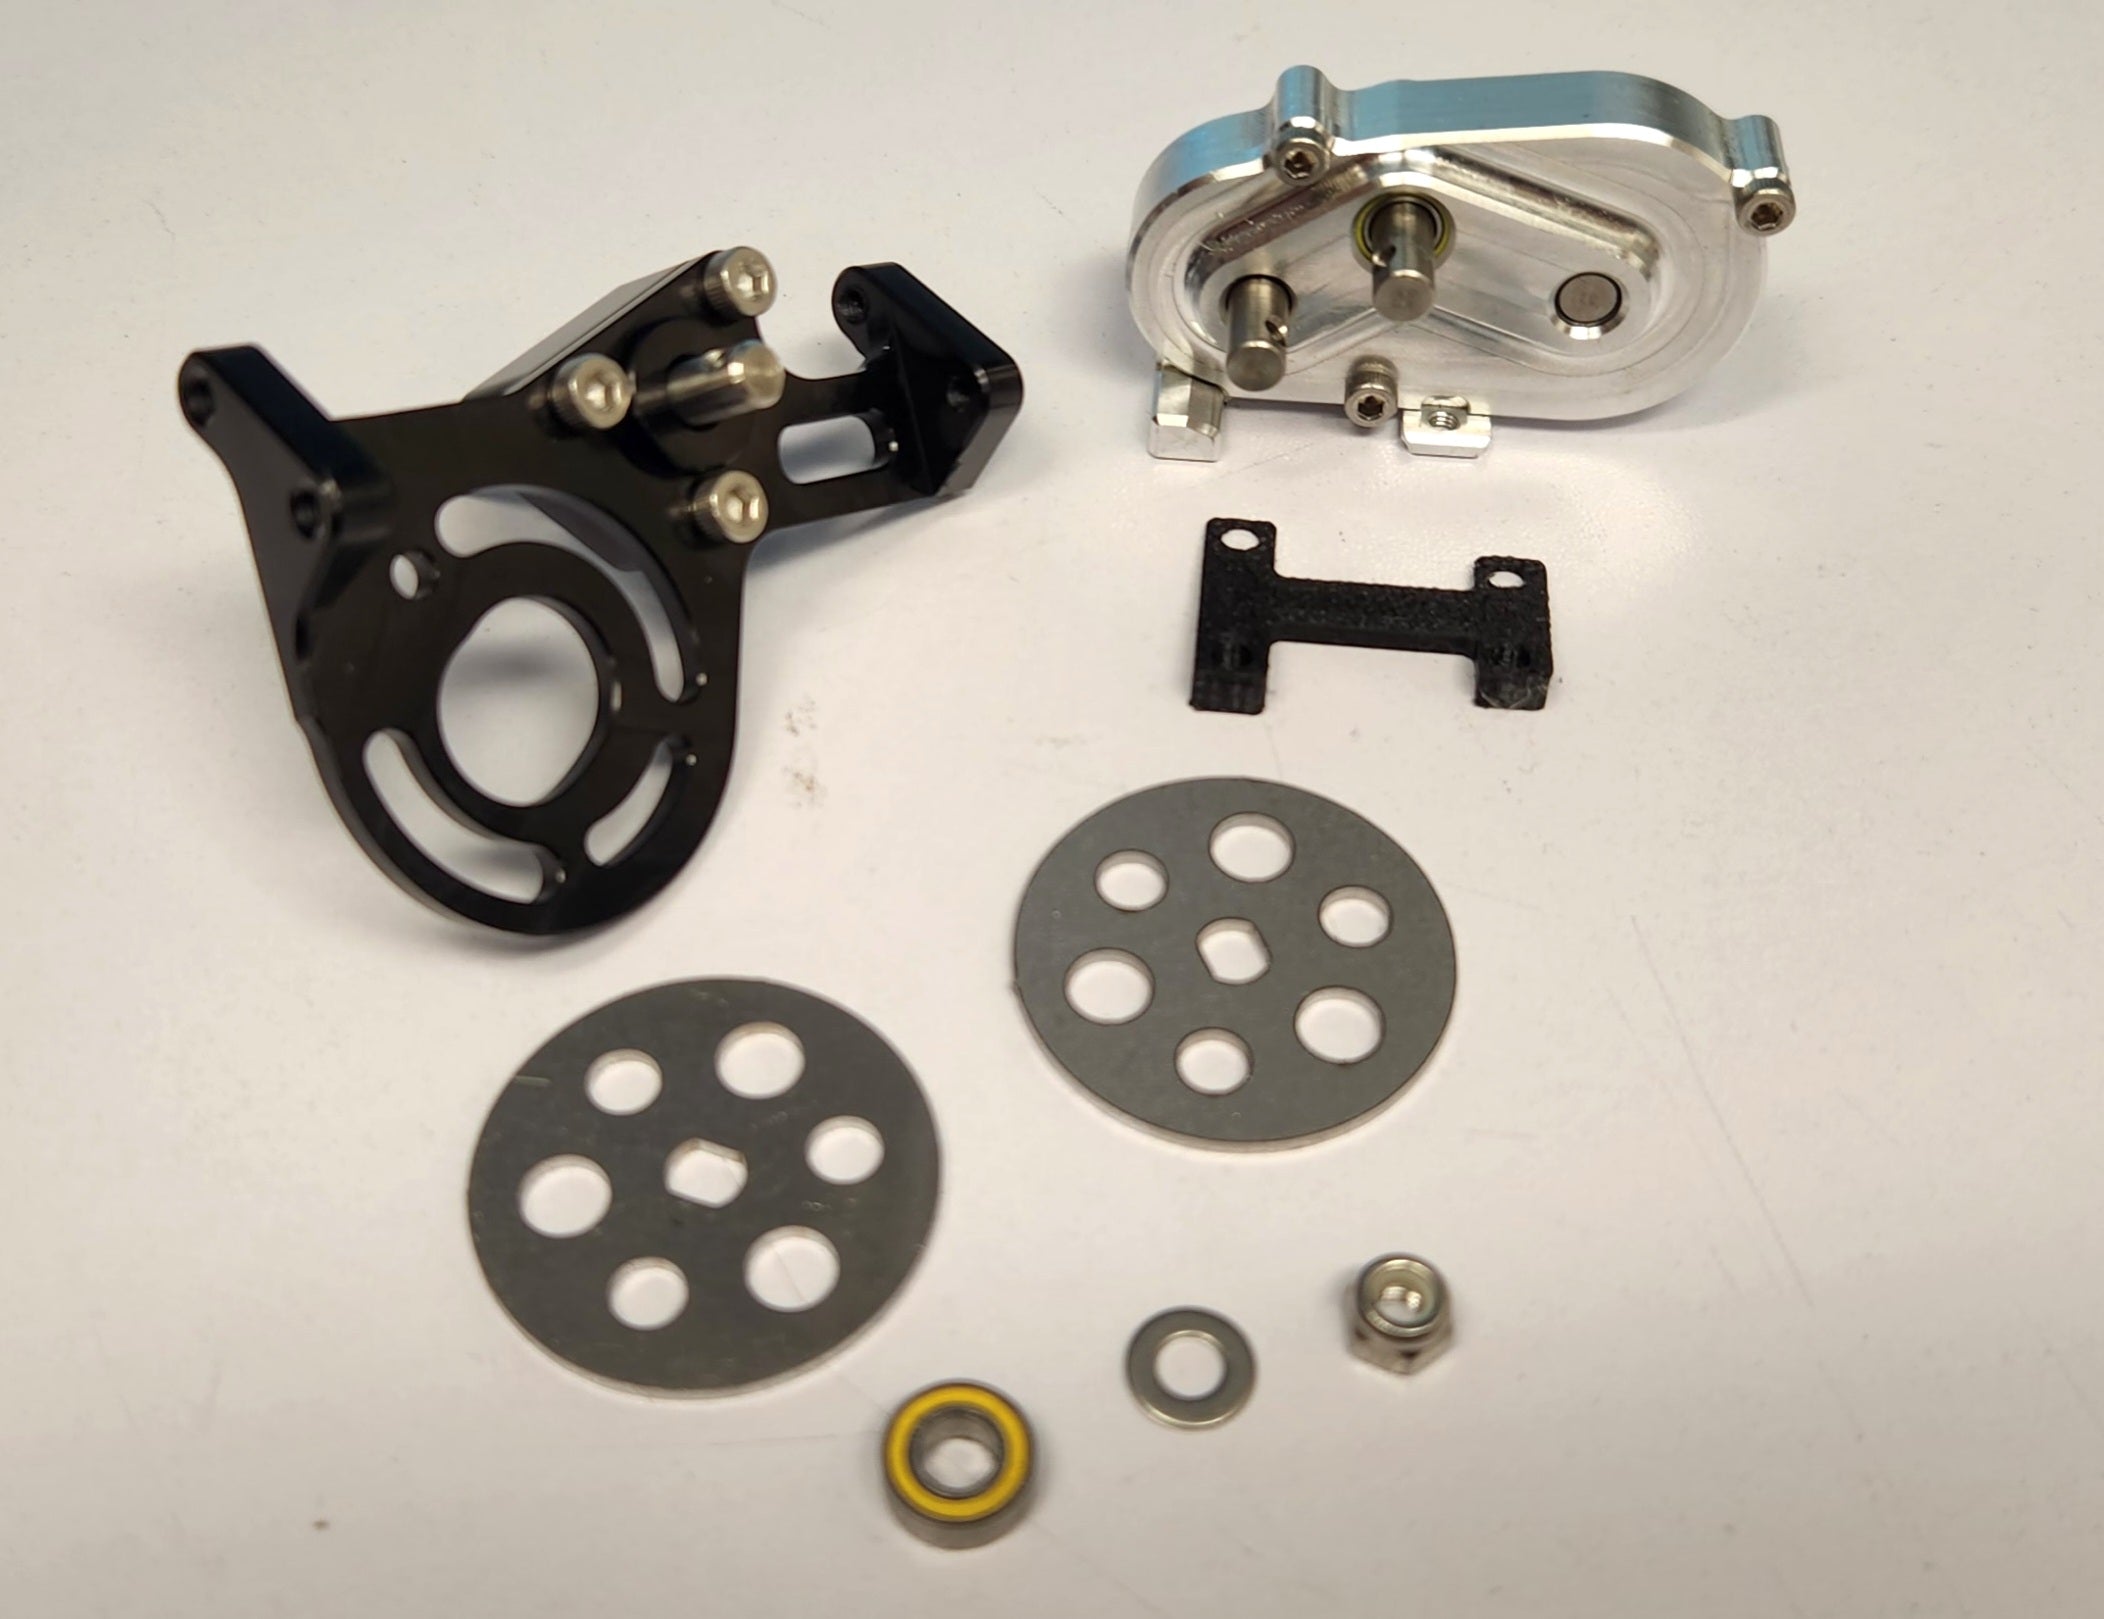 TGH Forward Motor Mount and 0% or 30% Overdrive Transfer Case package for the GS-V4 and V2-C1-FS Chassis